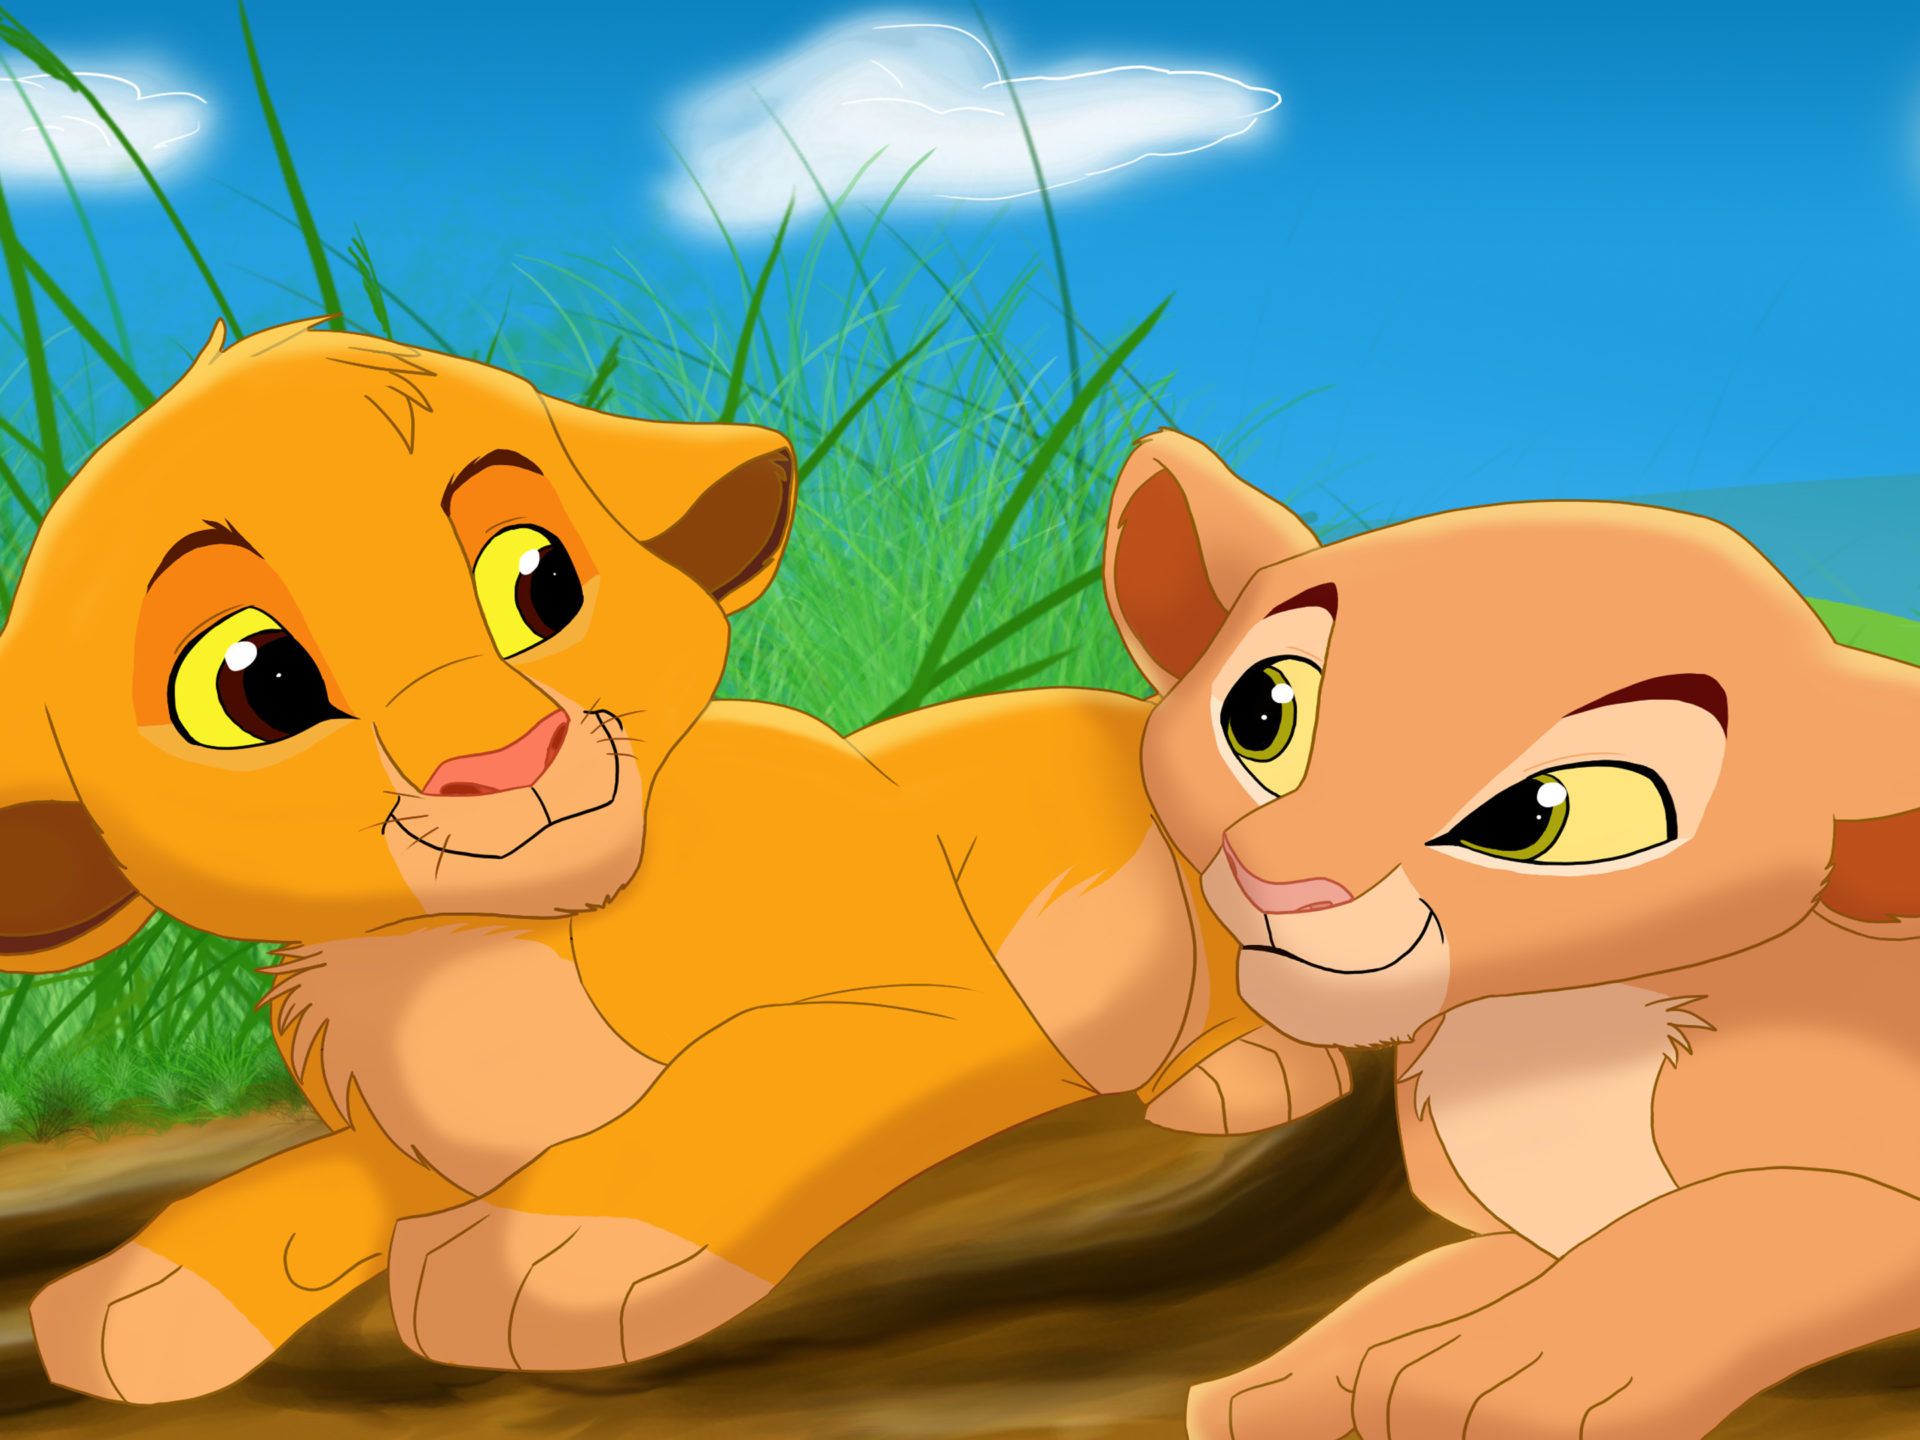 A cartoon of two lion cubs sitting together - The Lion King